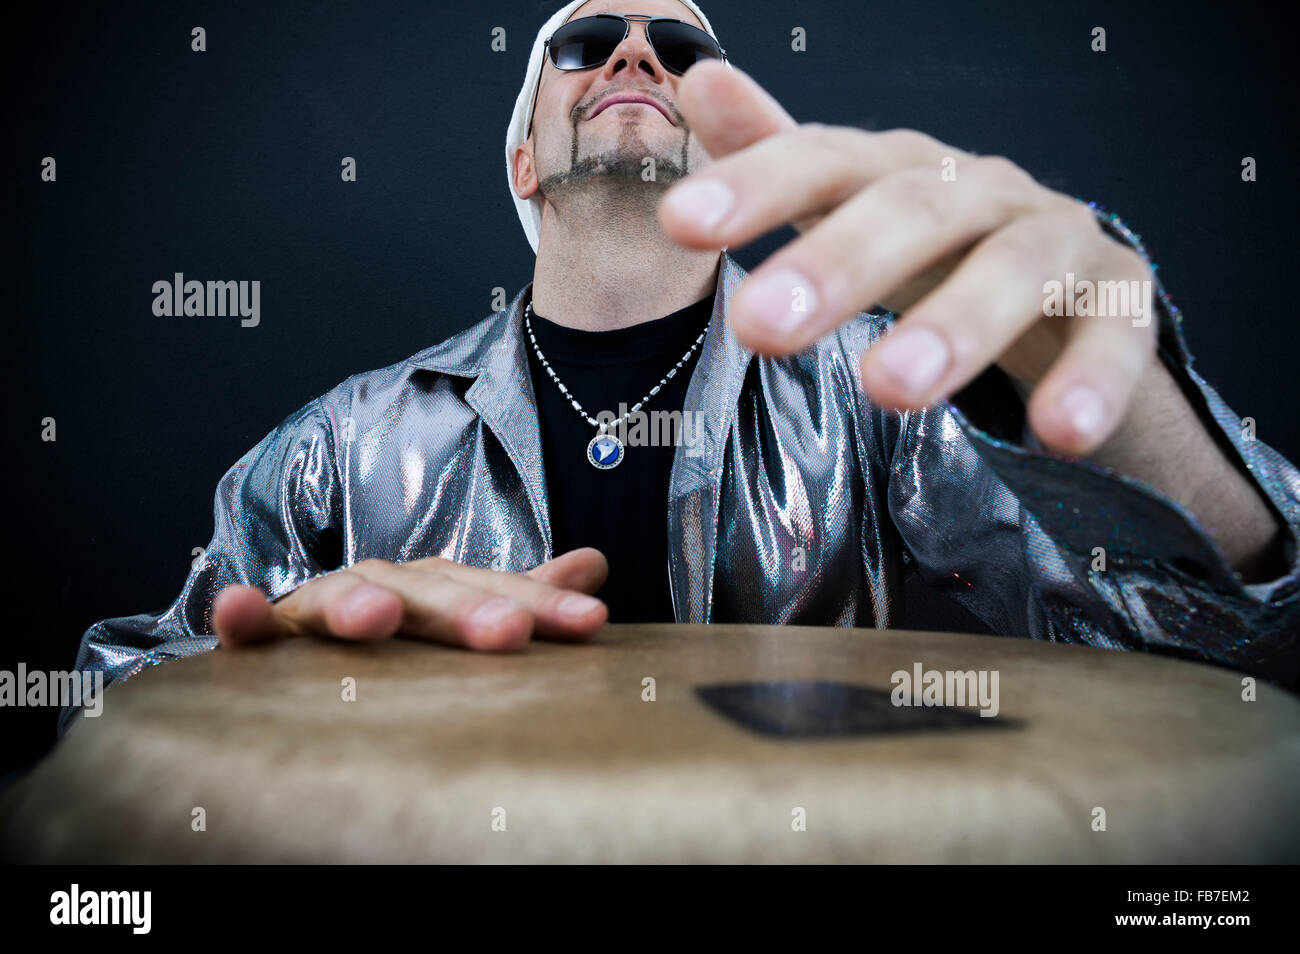 Mature man playing drum against black background Stock Photo